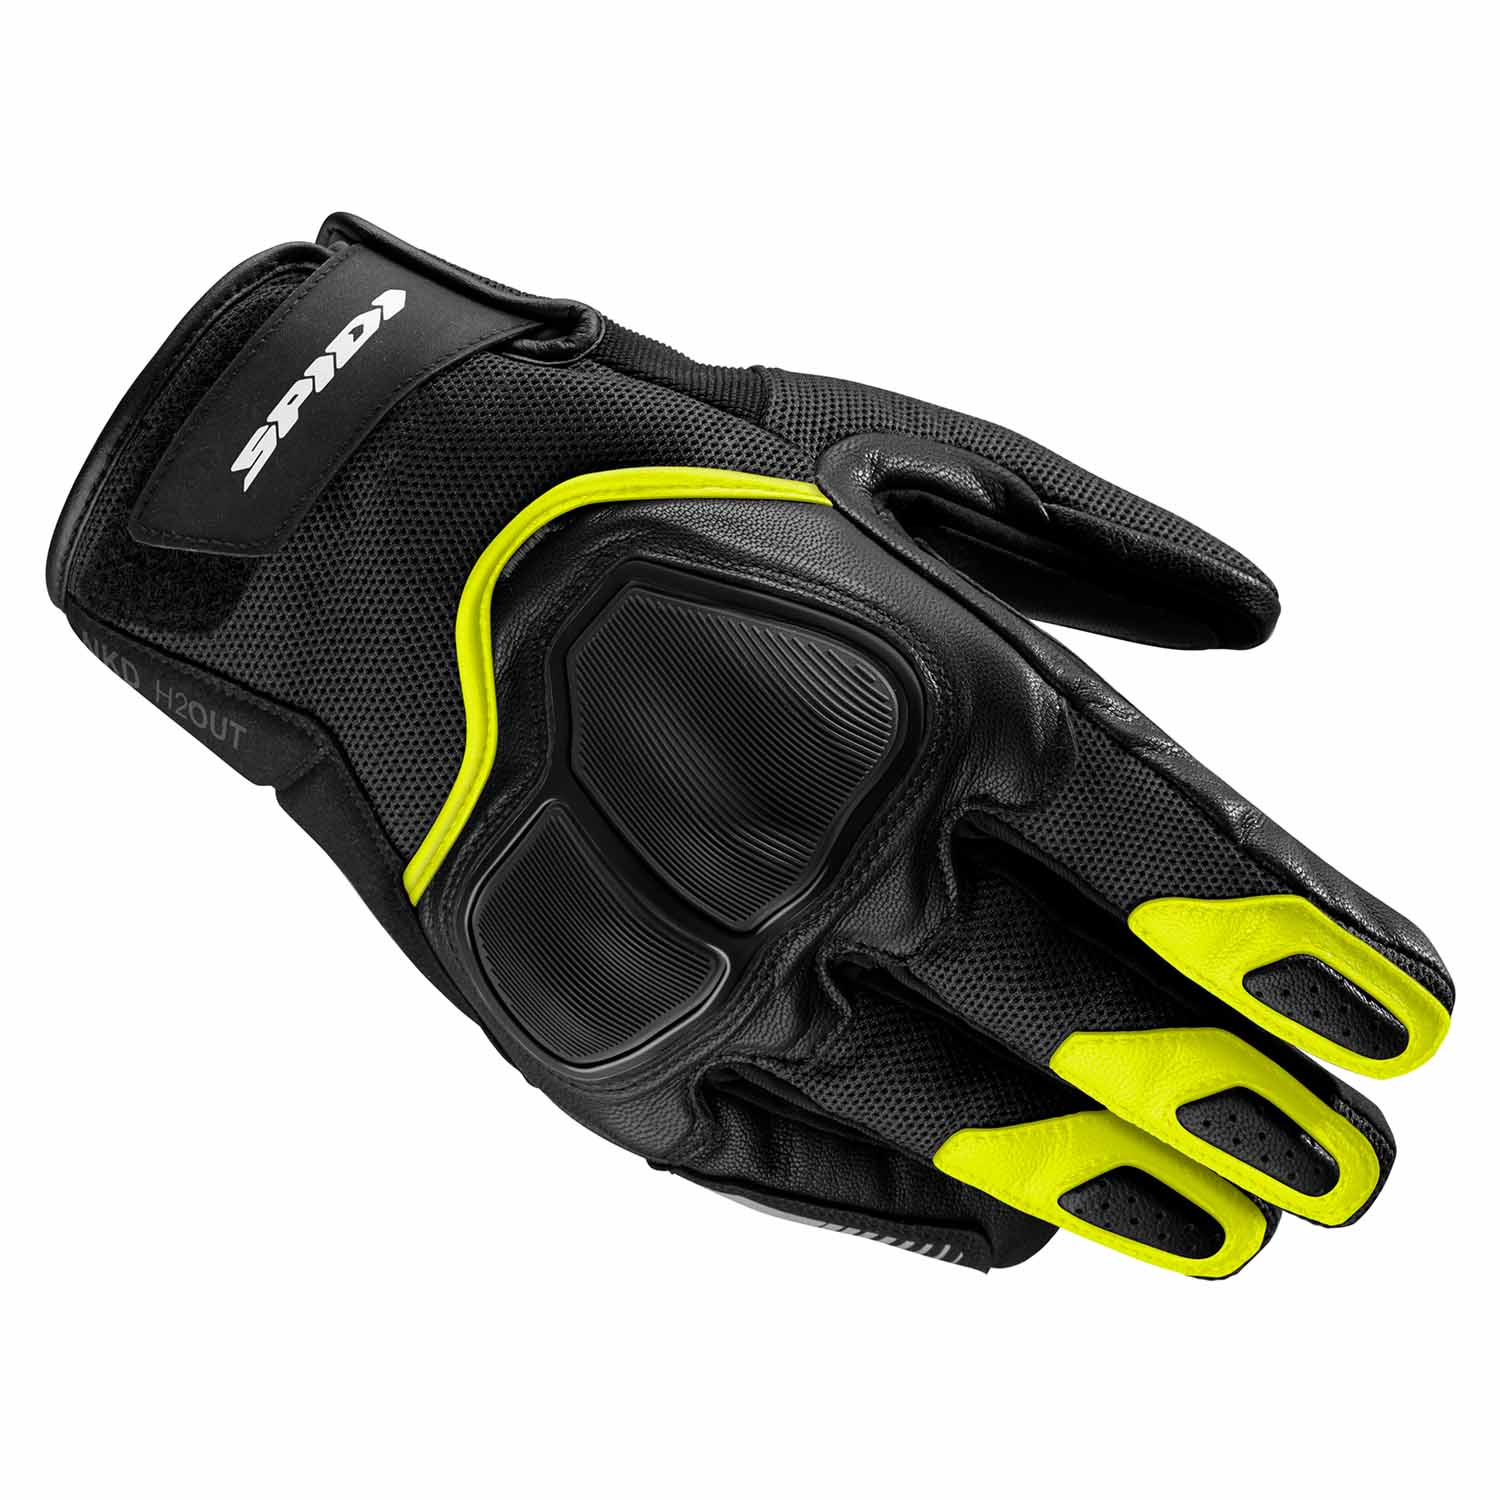 Image of Spidi NKD H2OUT Gloves Yellow Fluo Size 3XL ID 8030161496758